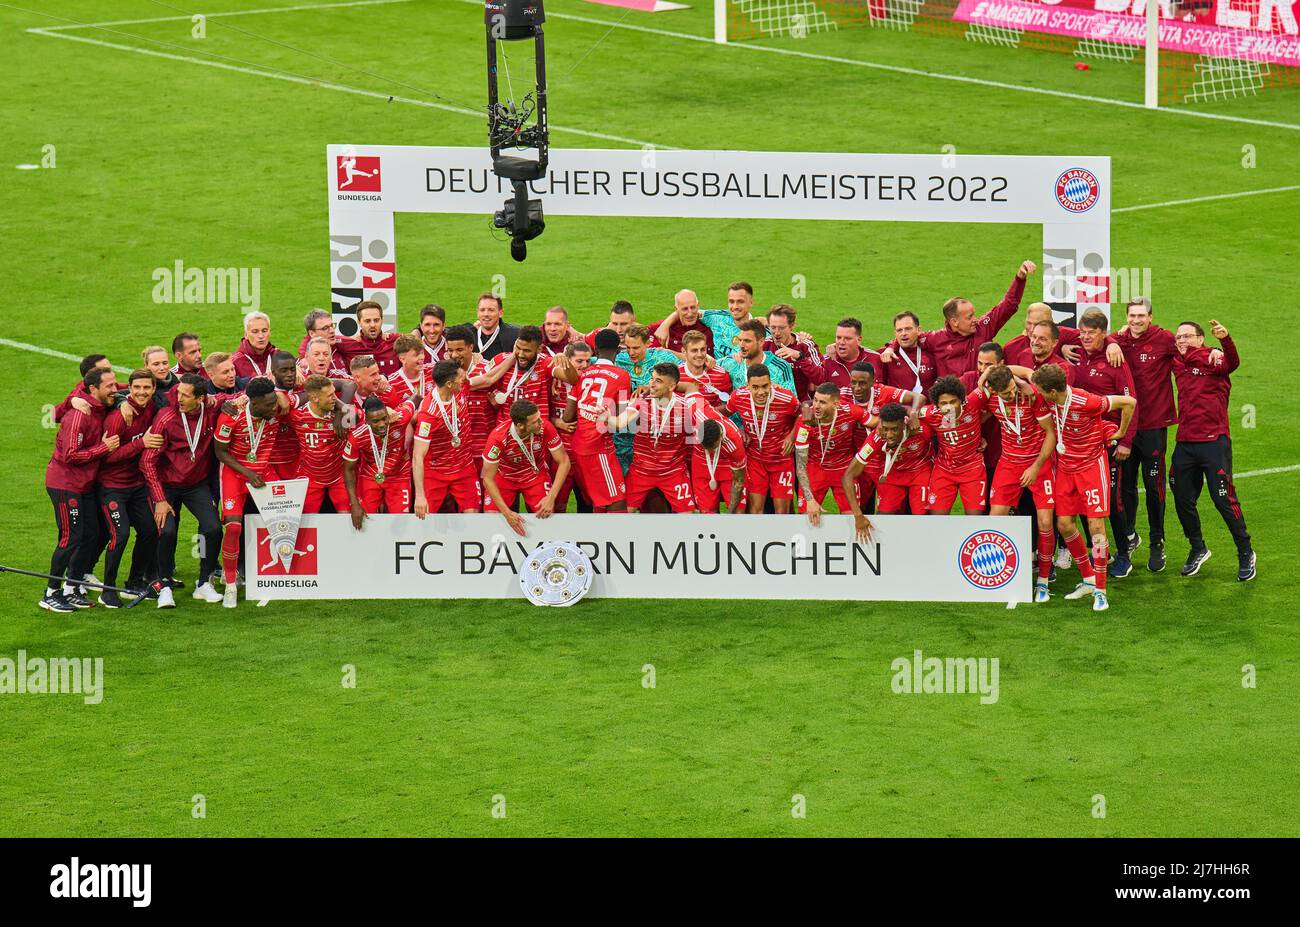 Munich, Germany, 08/05/2022, Winner ceremony with FCB team and trophy after  the match FC BAYERN MÜNCHEN - VFB STUTTGART 2-2 1.German Football League on  Mai 08, 2022 in Munich, Germany. Season 2021/2022,